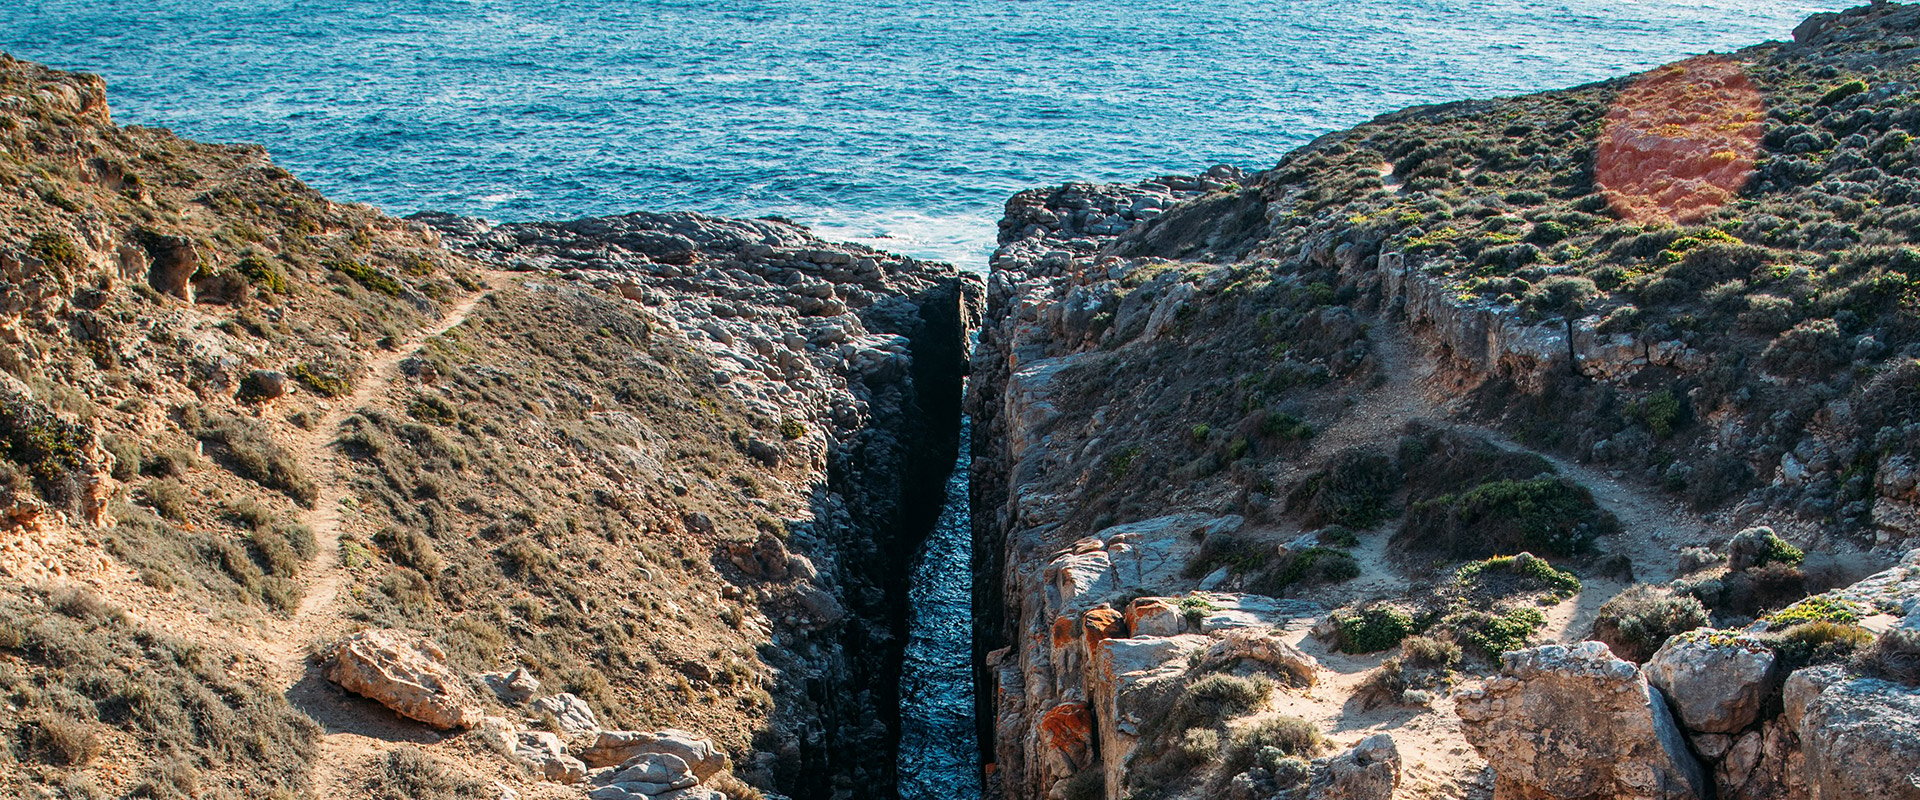 Whalers Way, Eyre Peninsula